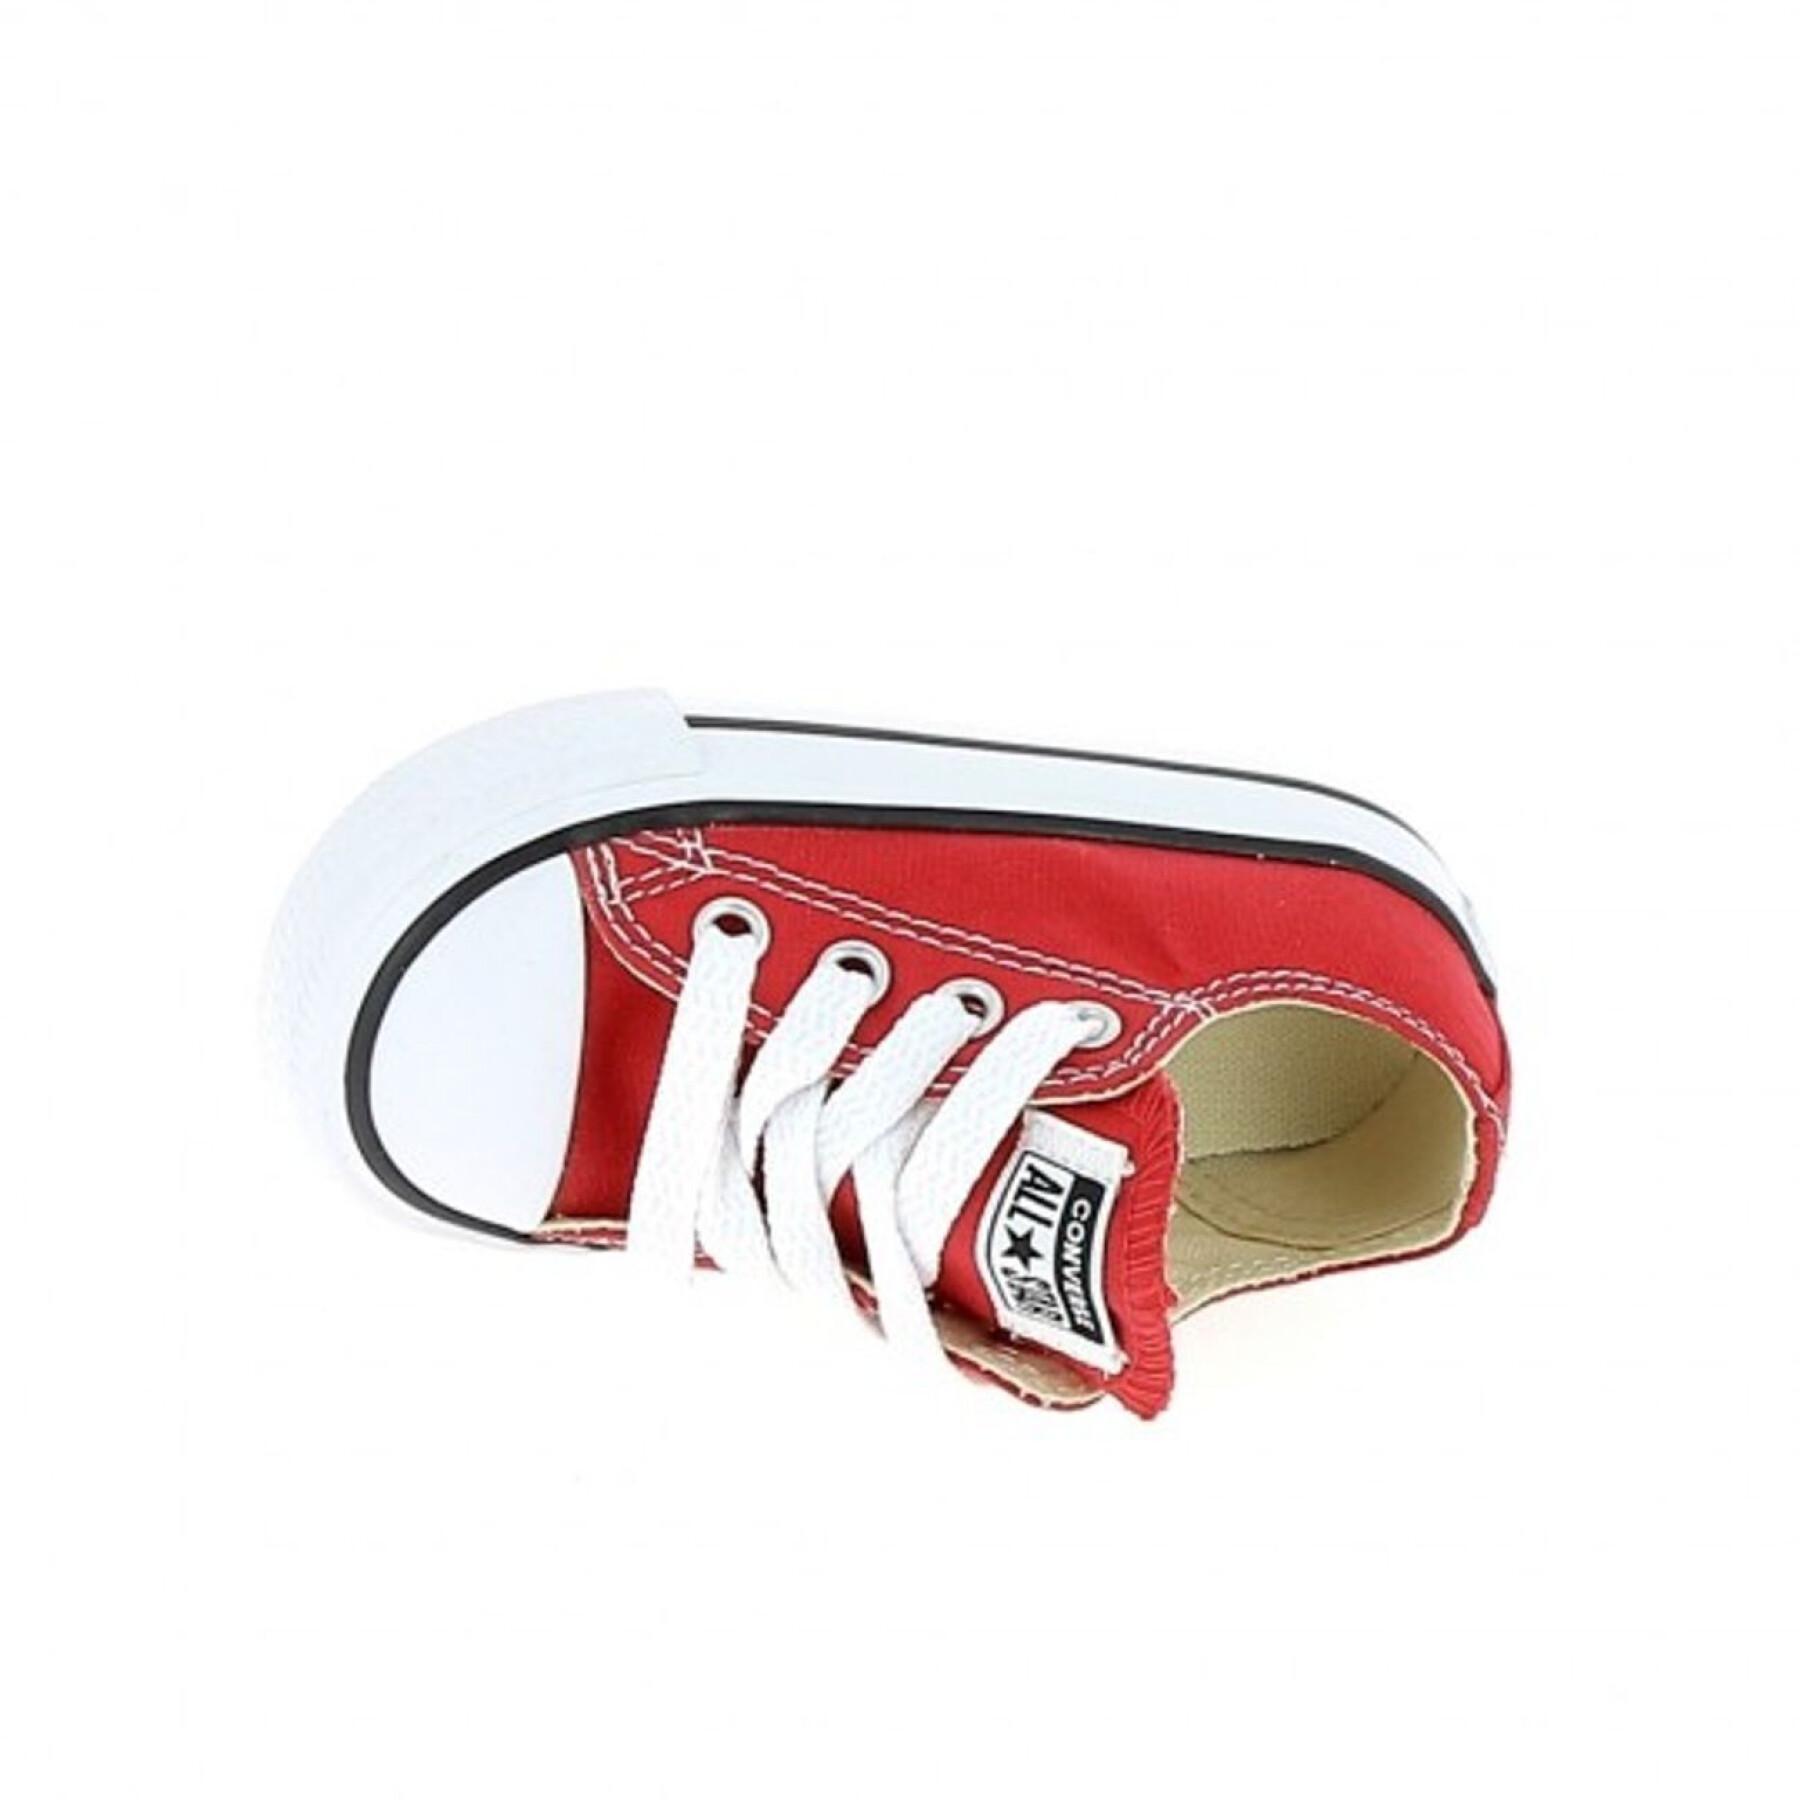 Baby sneakers Converse Chuck Taylor